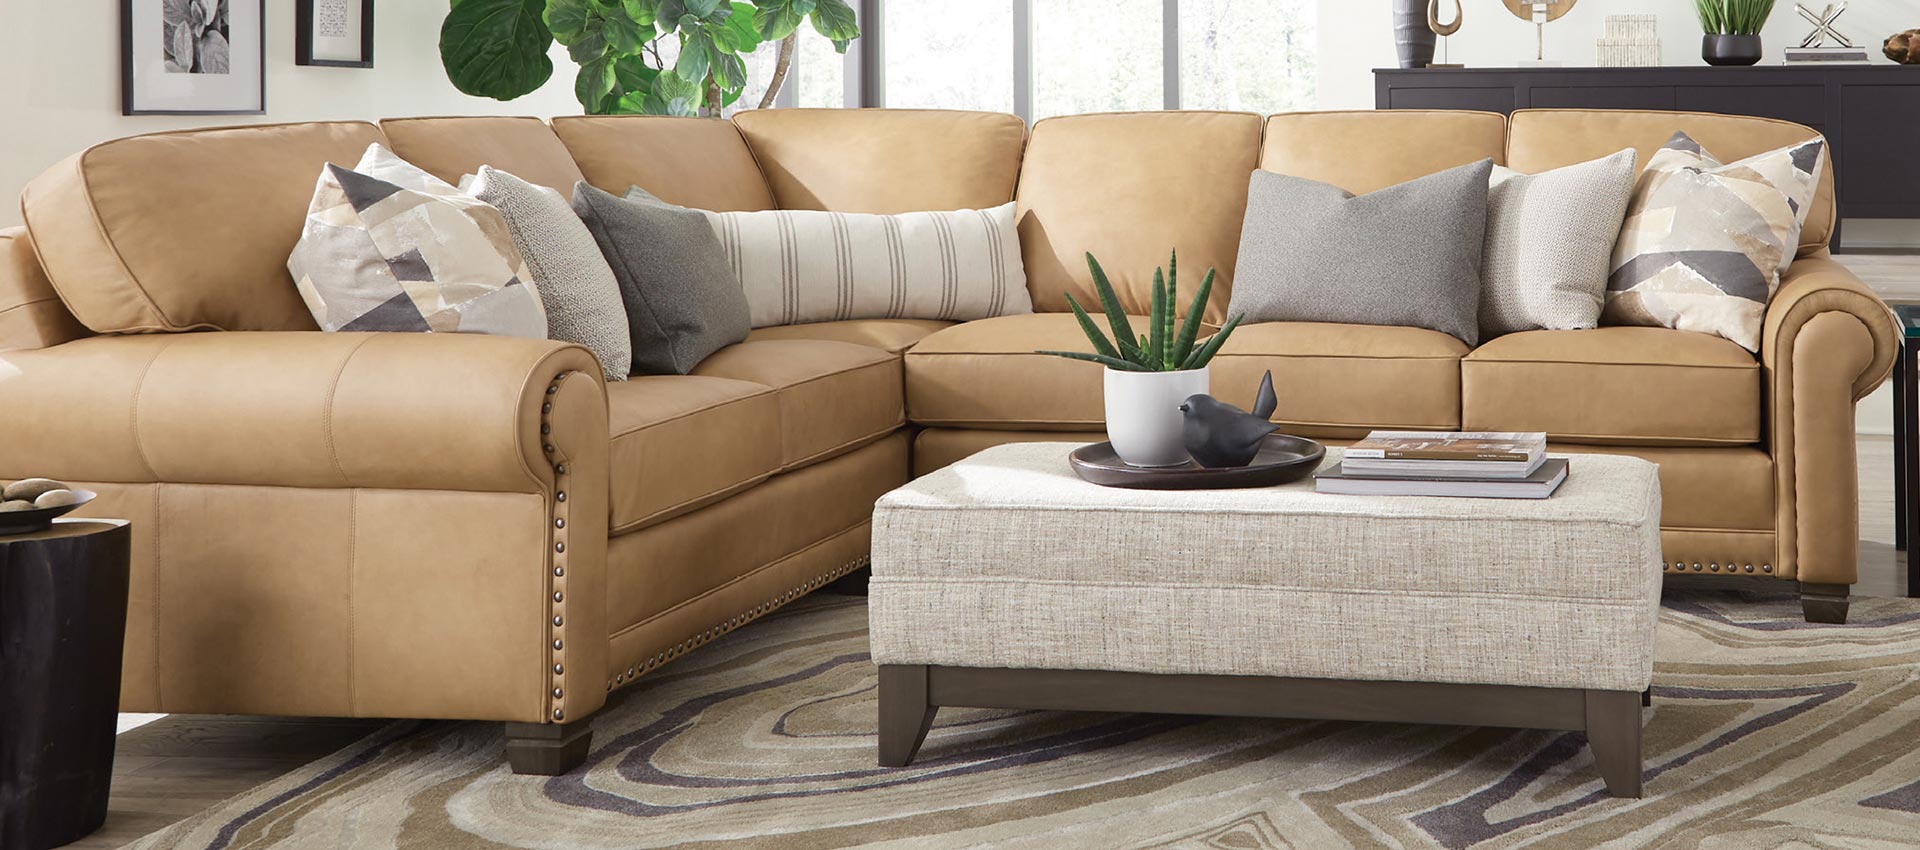 smith brothers sectional